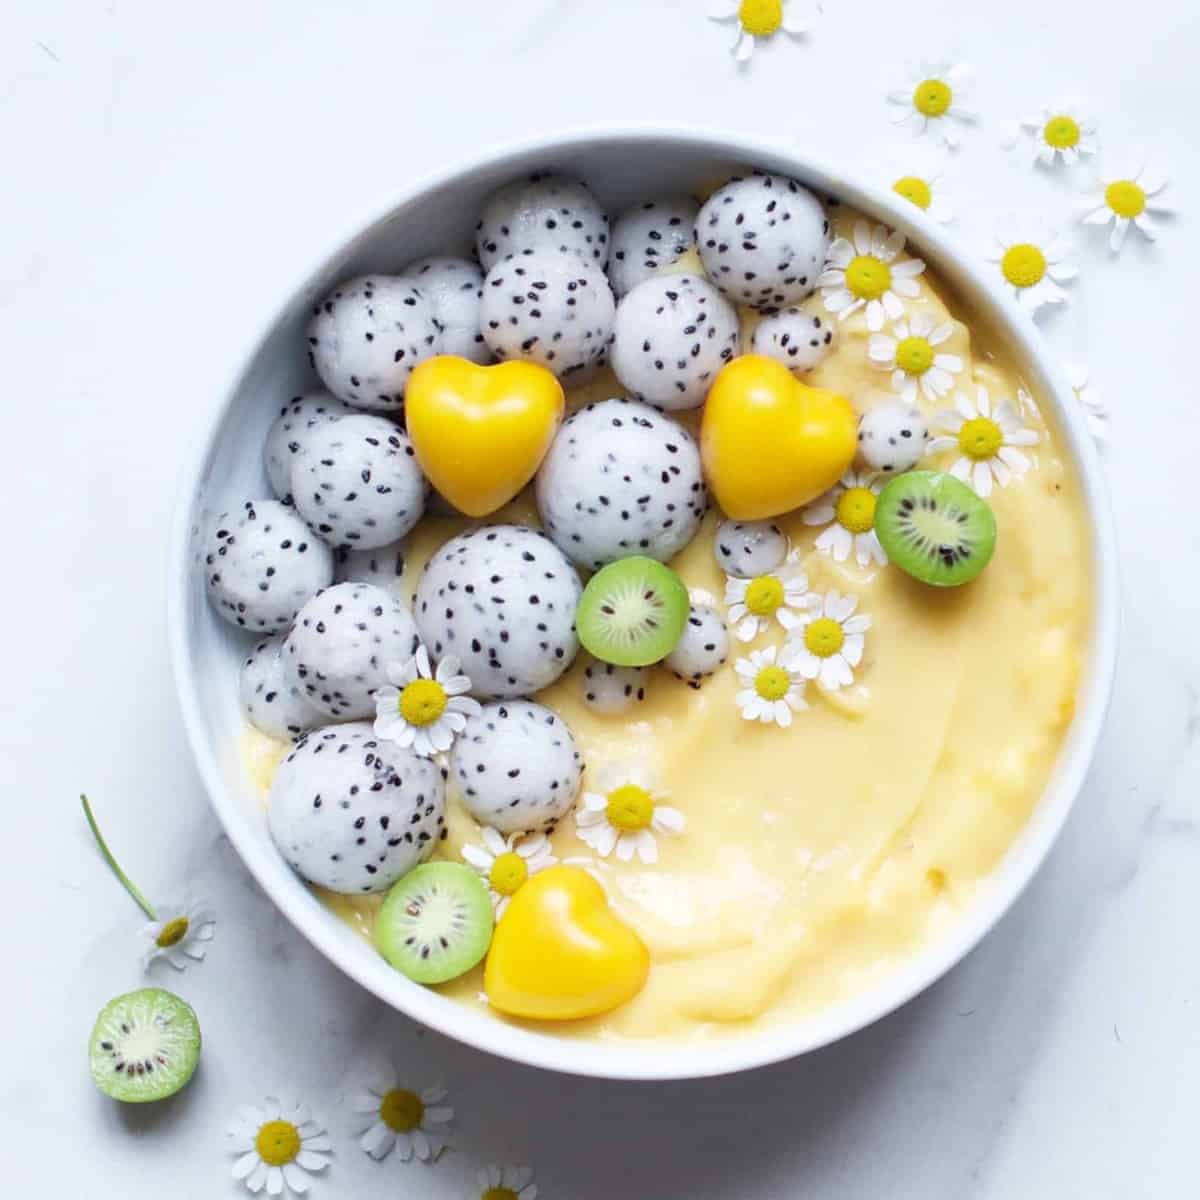 A bowl of yellow smoothie with dragon fruit balls yellow chocolate hearts mini kiwi halves and edible flowers 